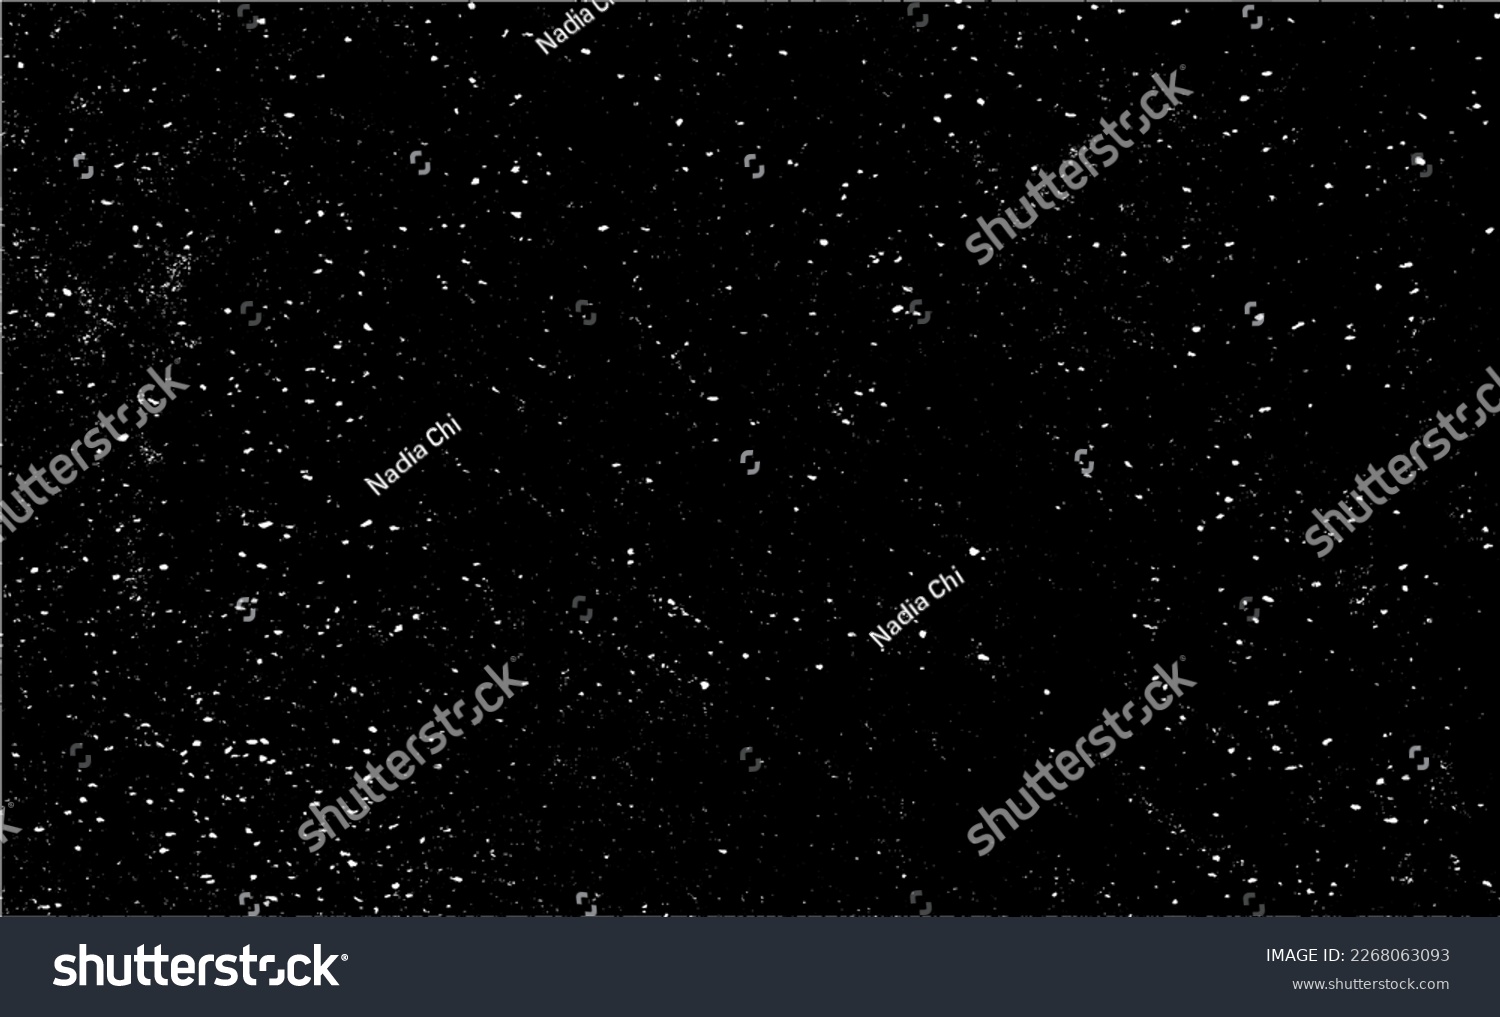 Snow, stars, twinkling lights, rain drops on black background. Abstract vector noise. Small particles of debris and dust. Distressed uneven grunge texture overlay. #2268063093